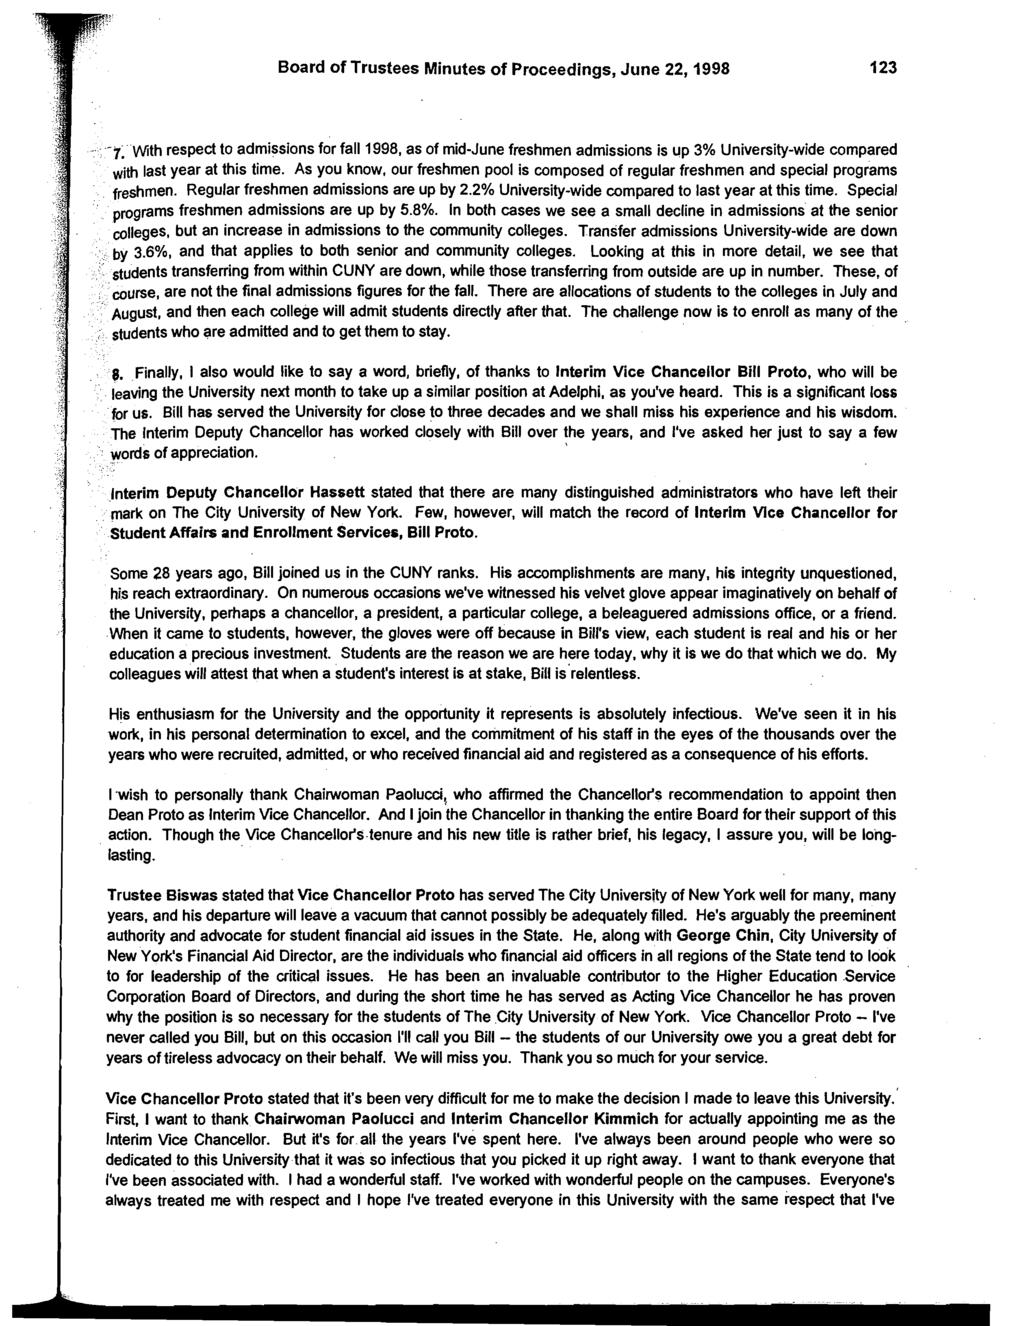 Board of Trustees Minutes of Proceedings, June 22,1998-7. with respect to admissions for fall 1998, as of midjune freshmen admissions is up 3% University-wide compared with last year at this time.